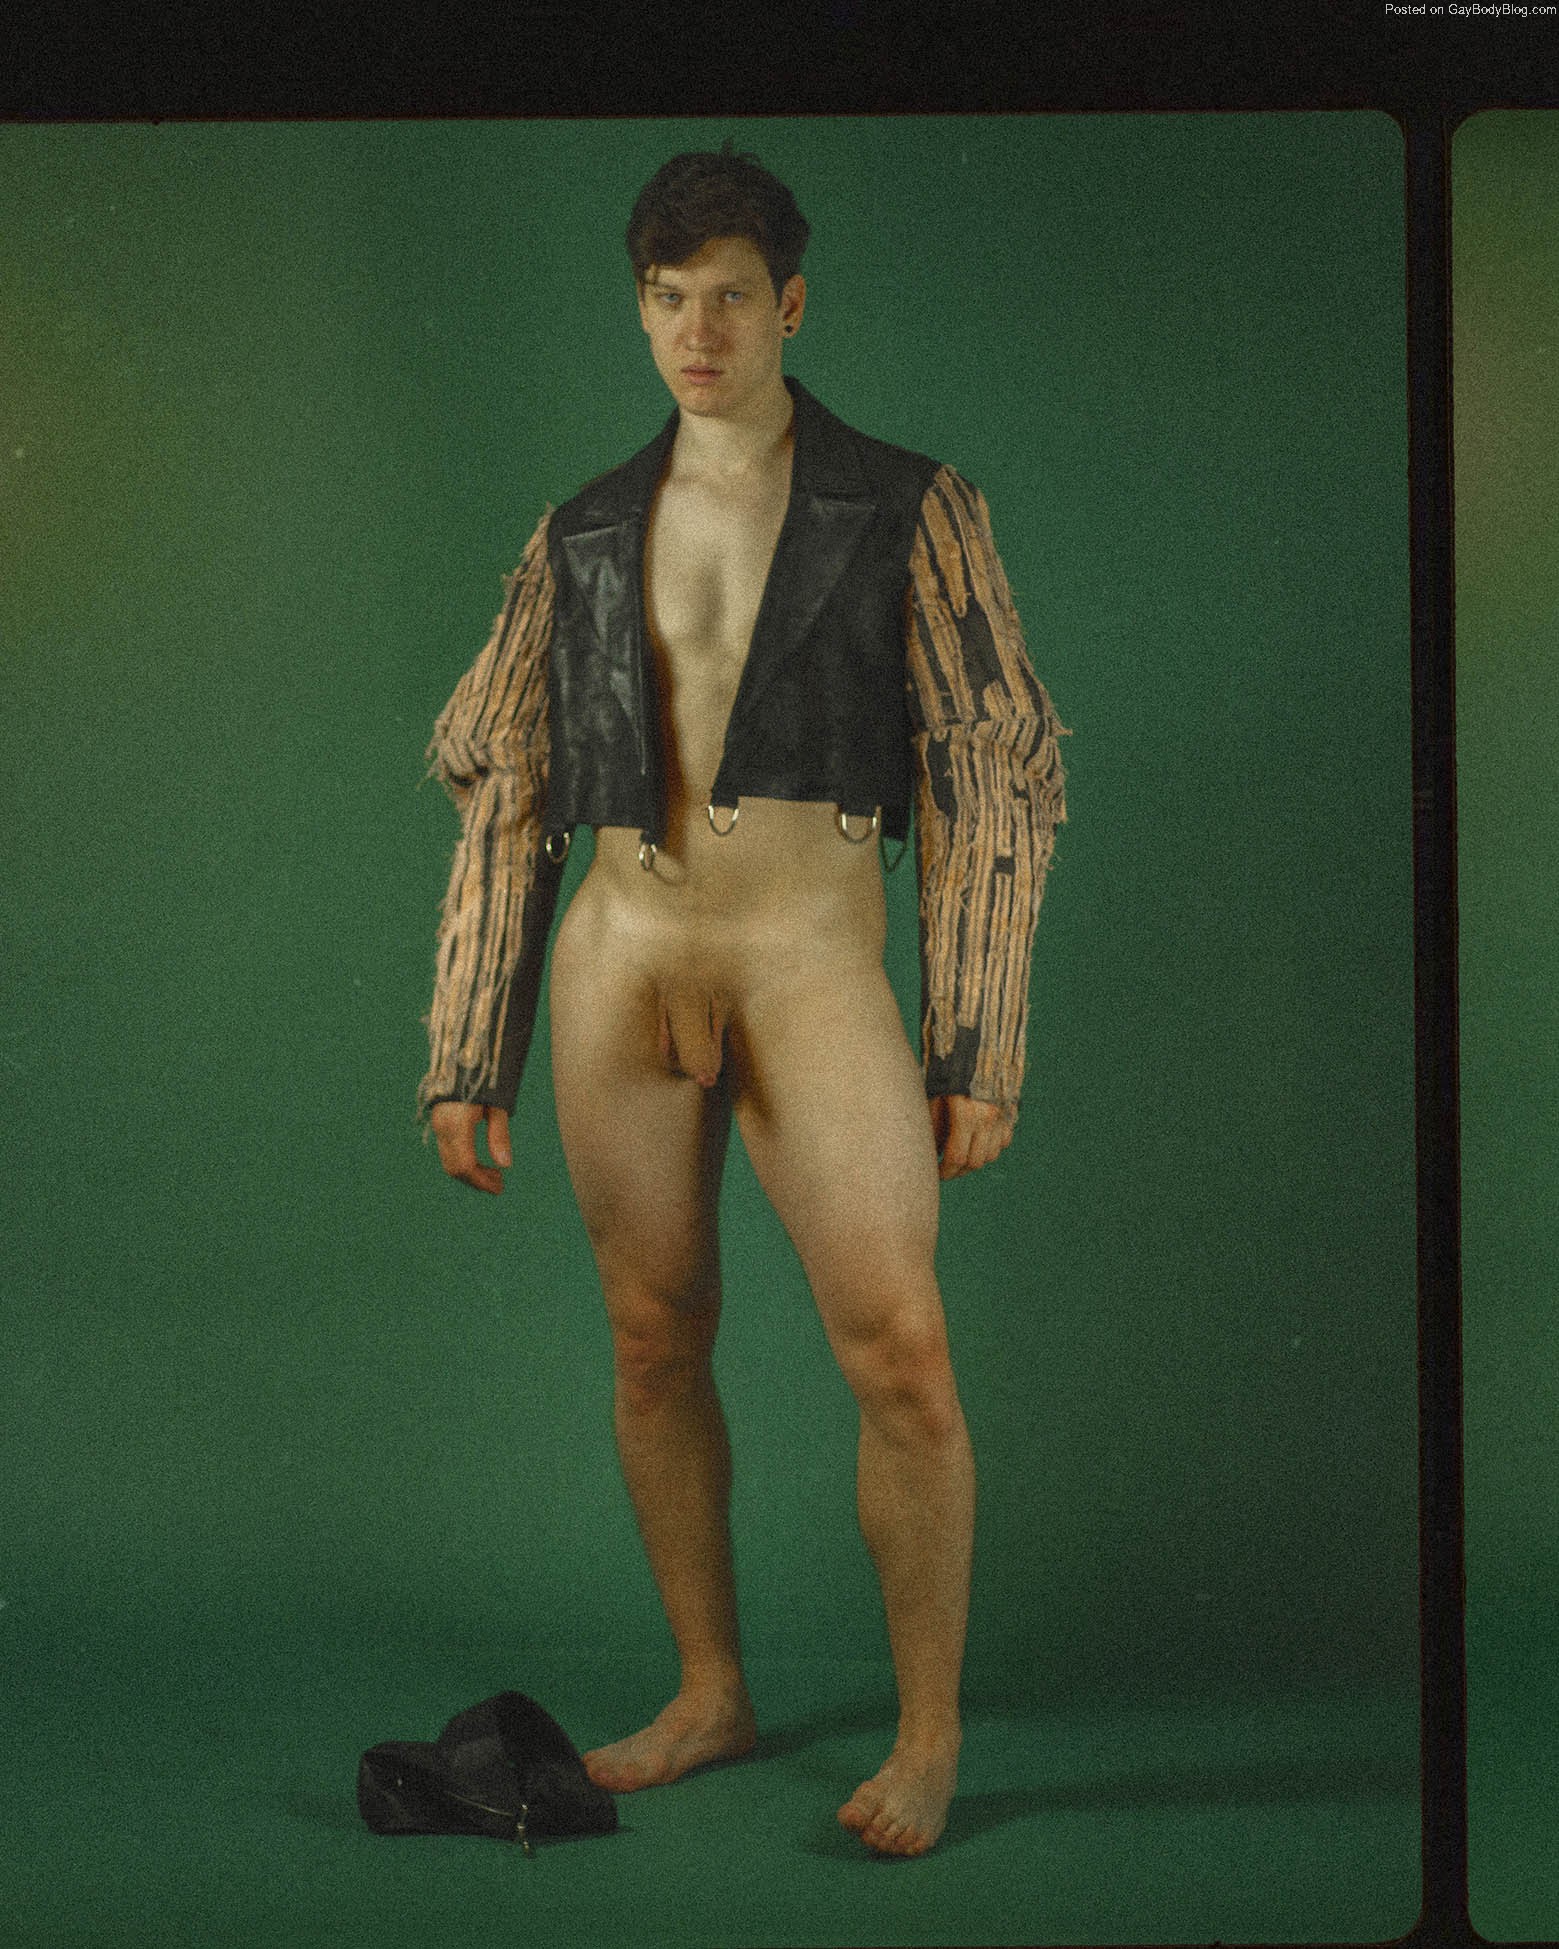 I Love The Retro Look Of Naked Andrey G. | Daily Dudes @ Dude Dump